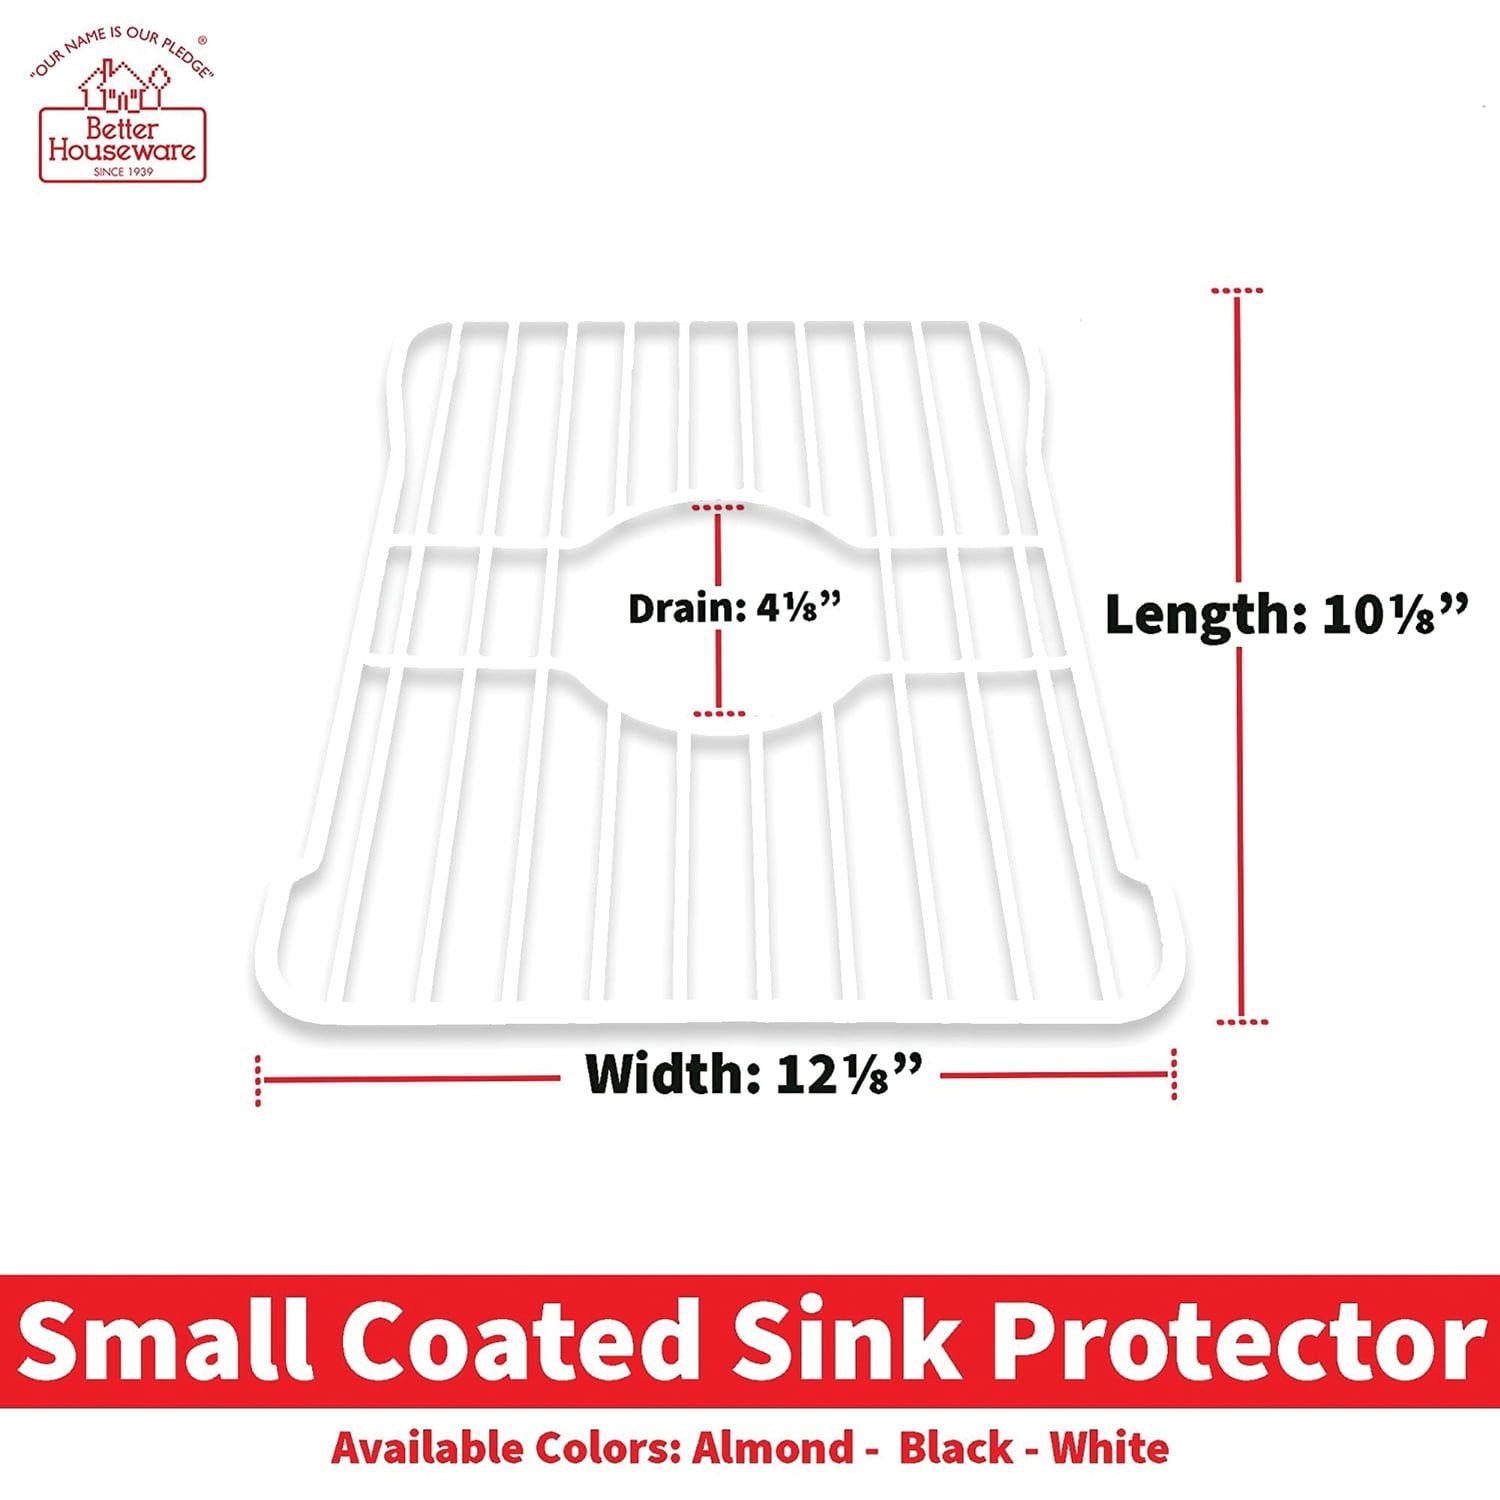  Better Houseware Small White Sink Protector (12-1/8” x